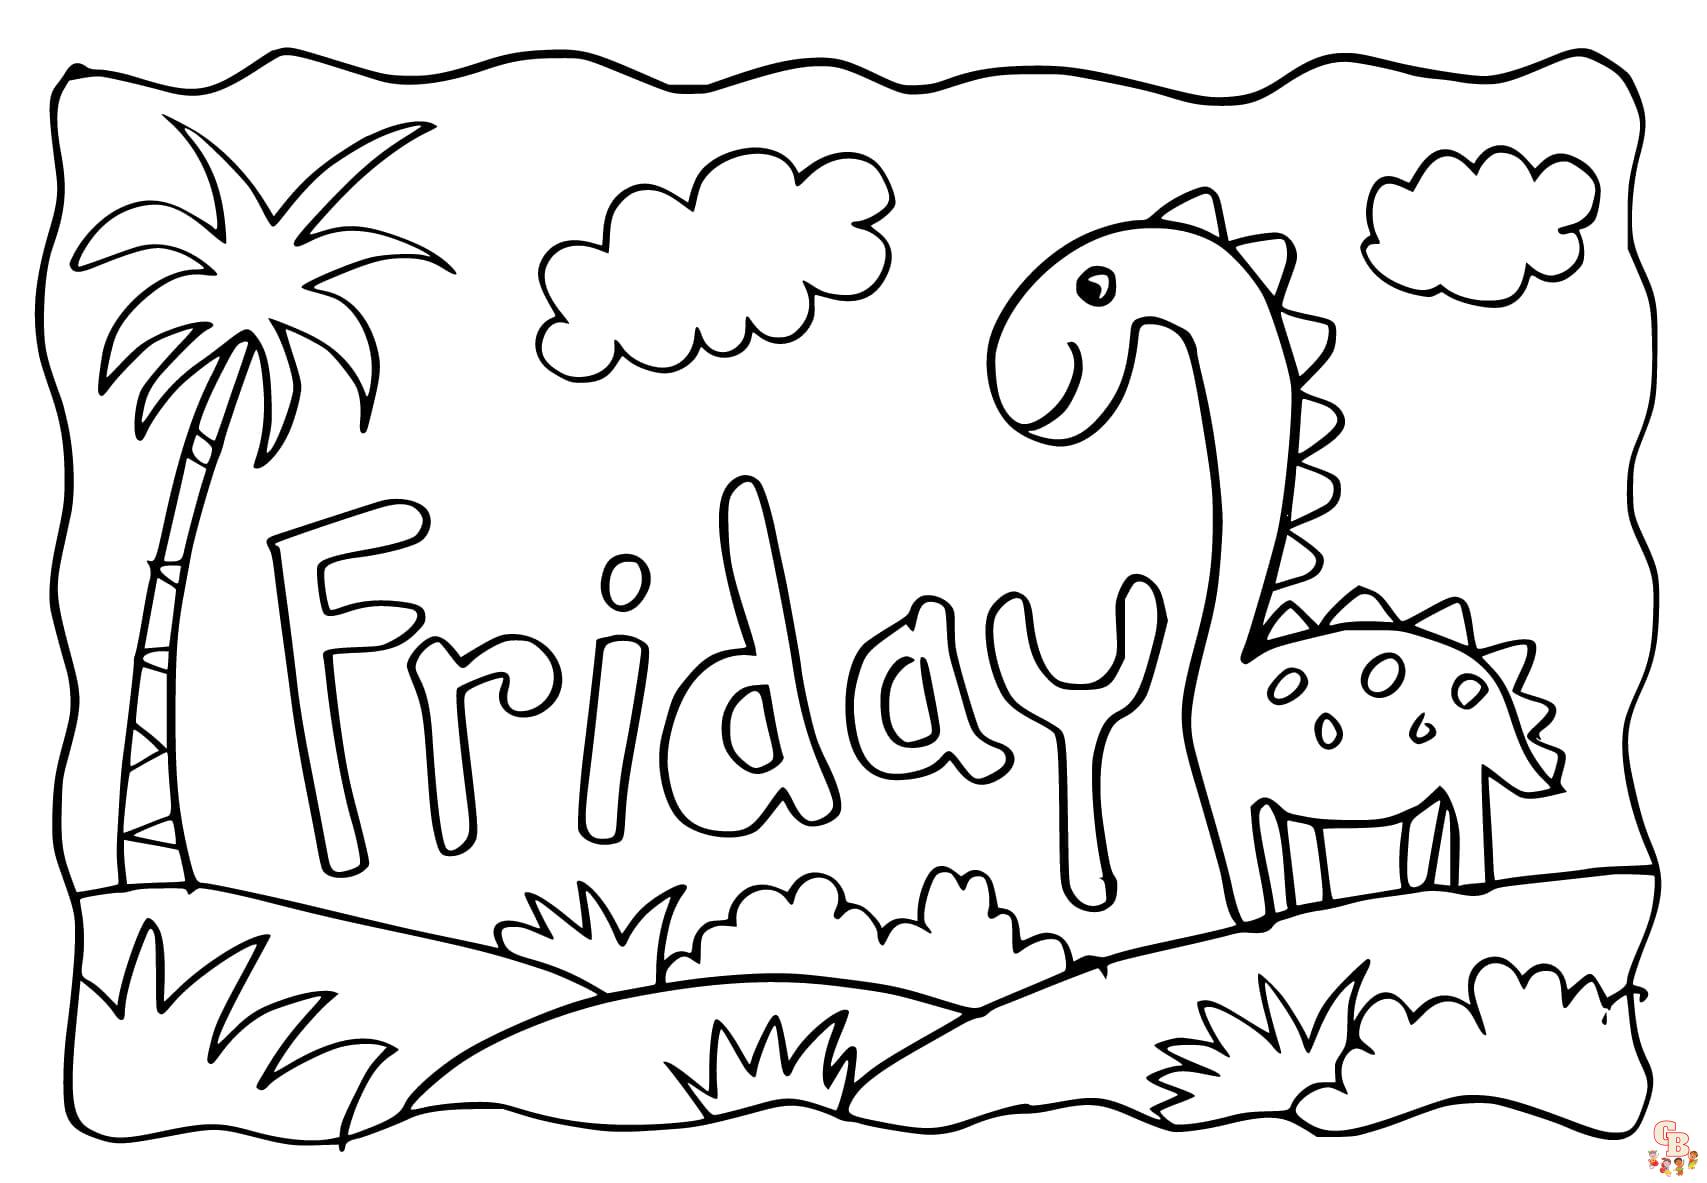 Free Friaday coloring pages for kids